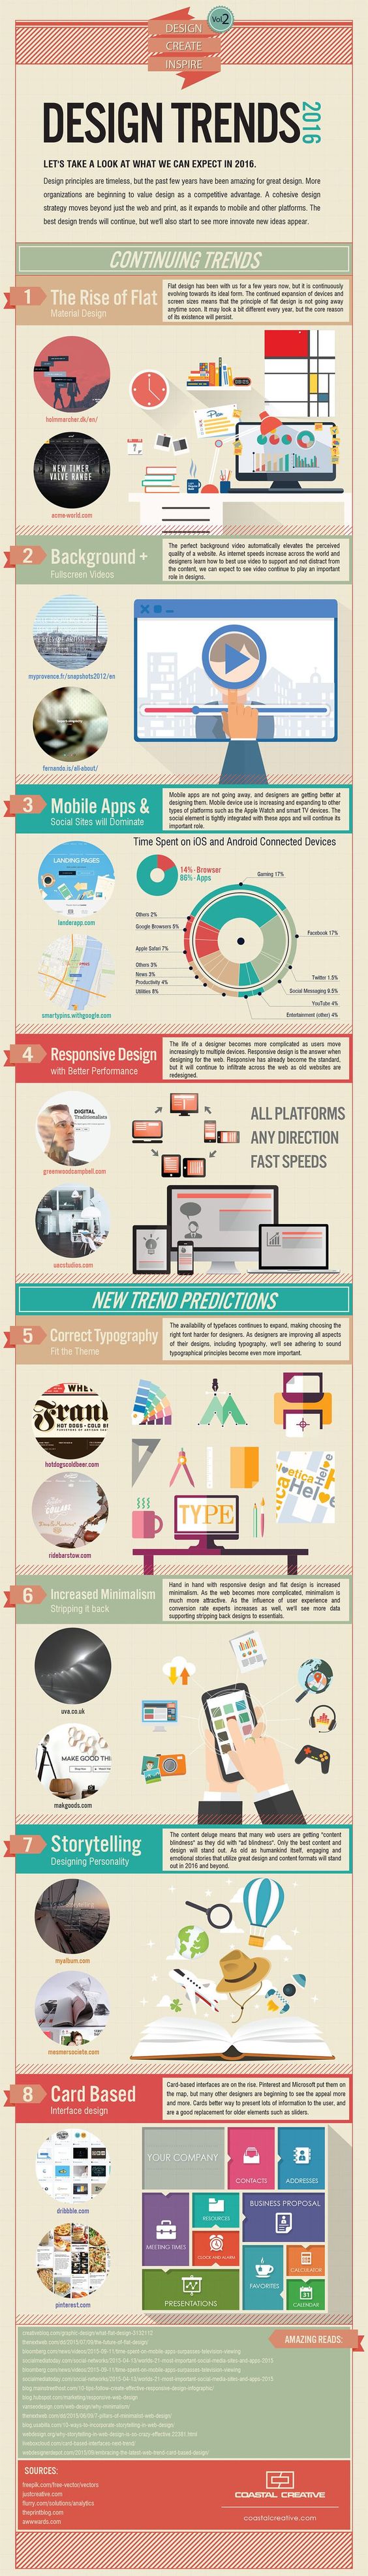 What Are 8 Web Design Trends For 2016? #infographic